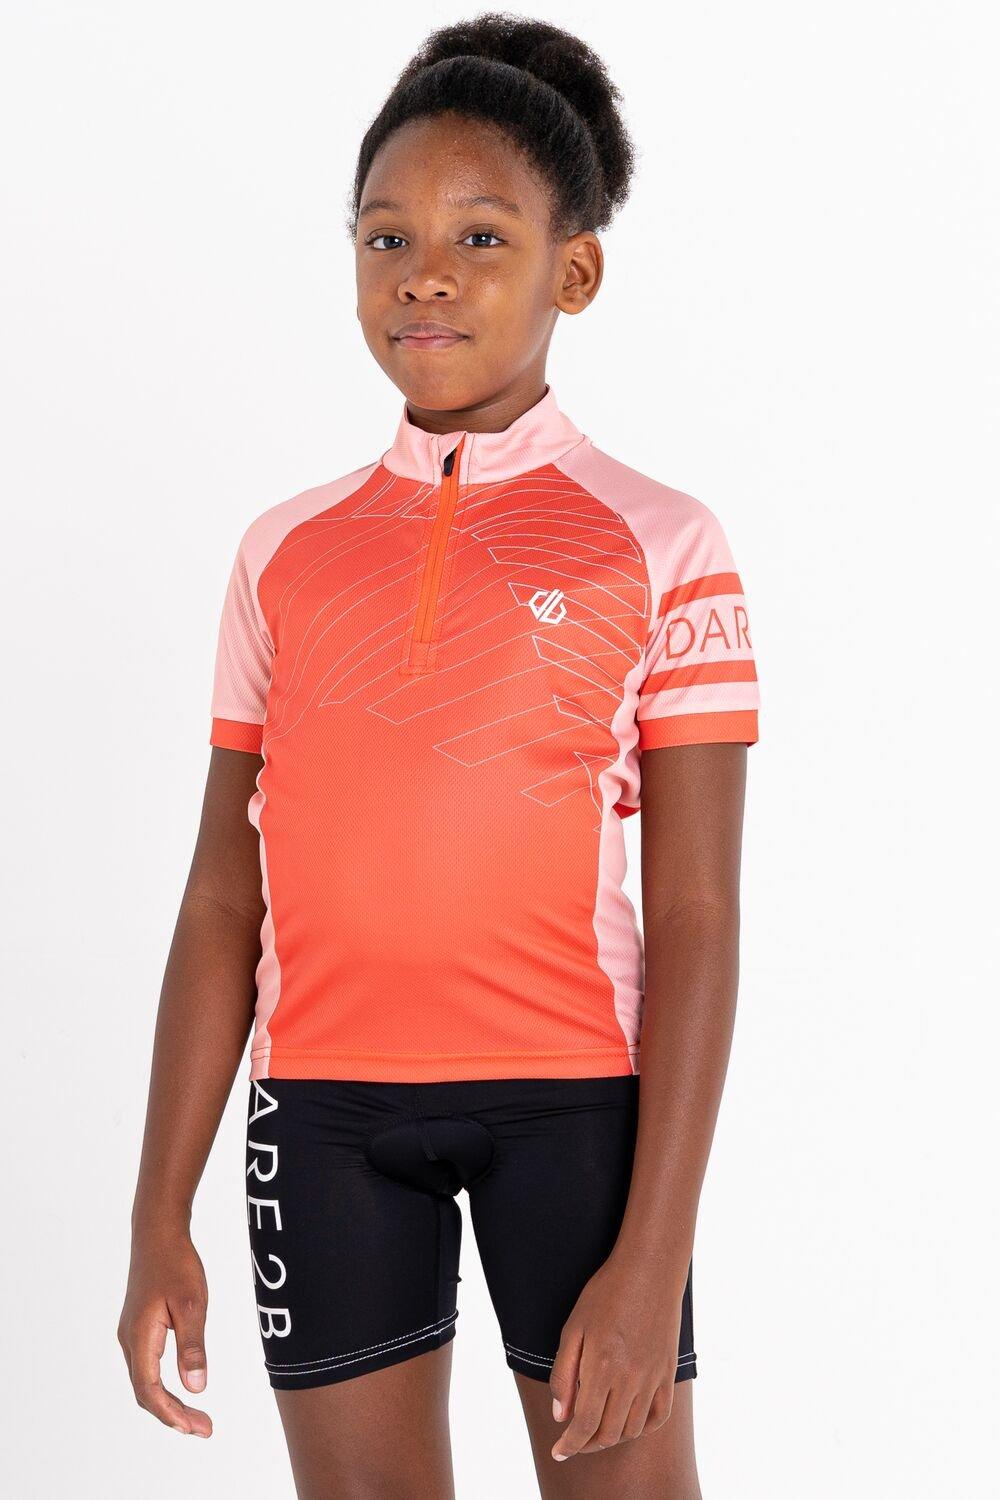 Q-Wic Plus ’Speed Up’ Cycling Jersey